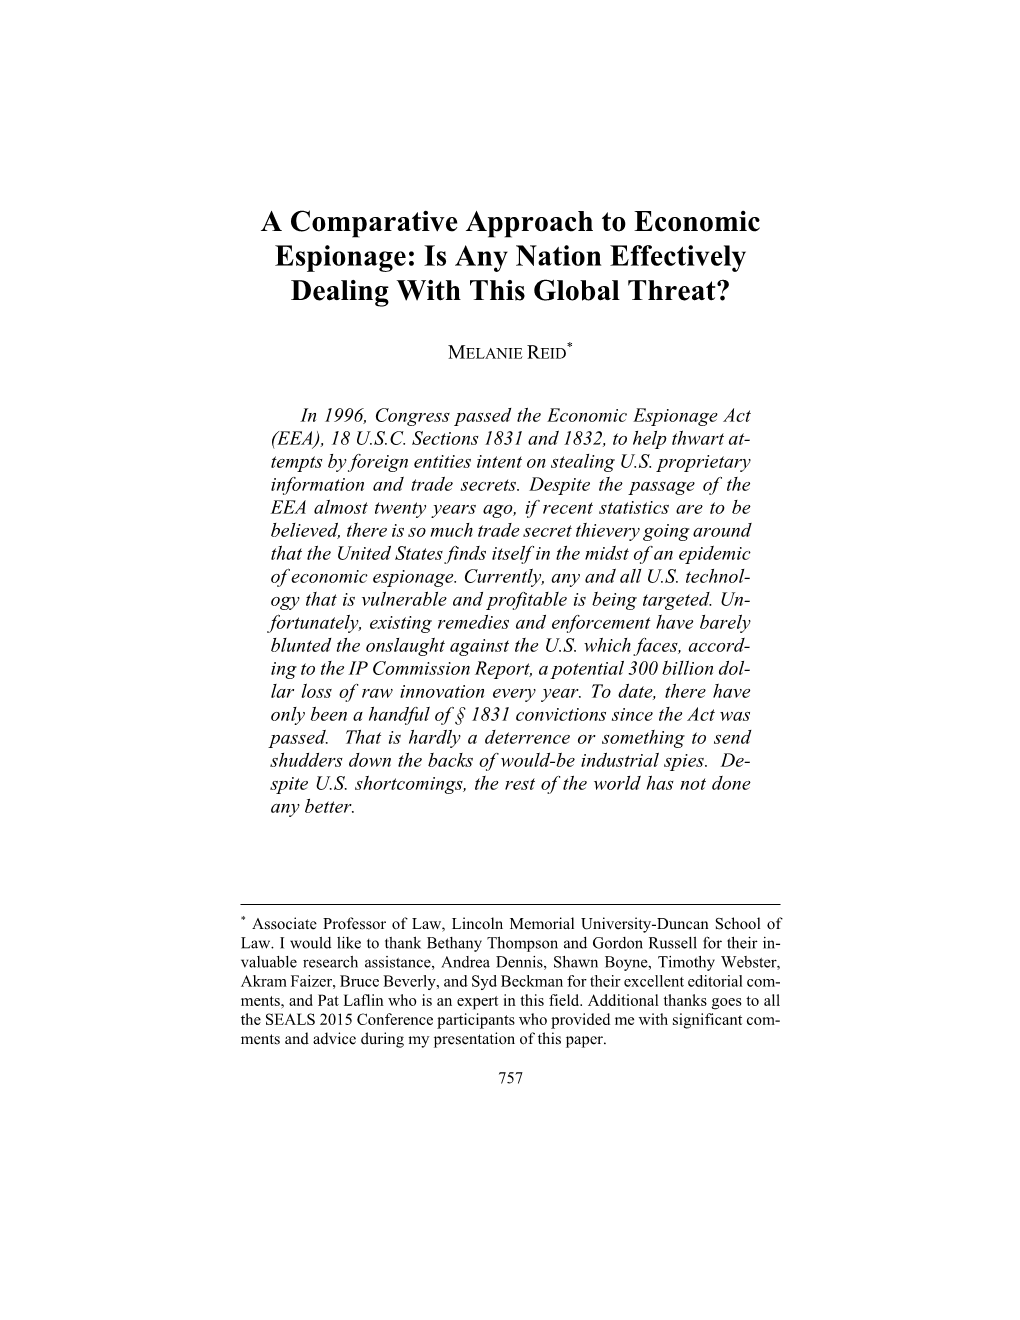 A Comparative Approach to Economic Espionage: Is Any Nation Effectively Dealing with This Global Threat?